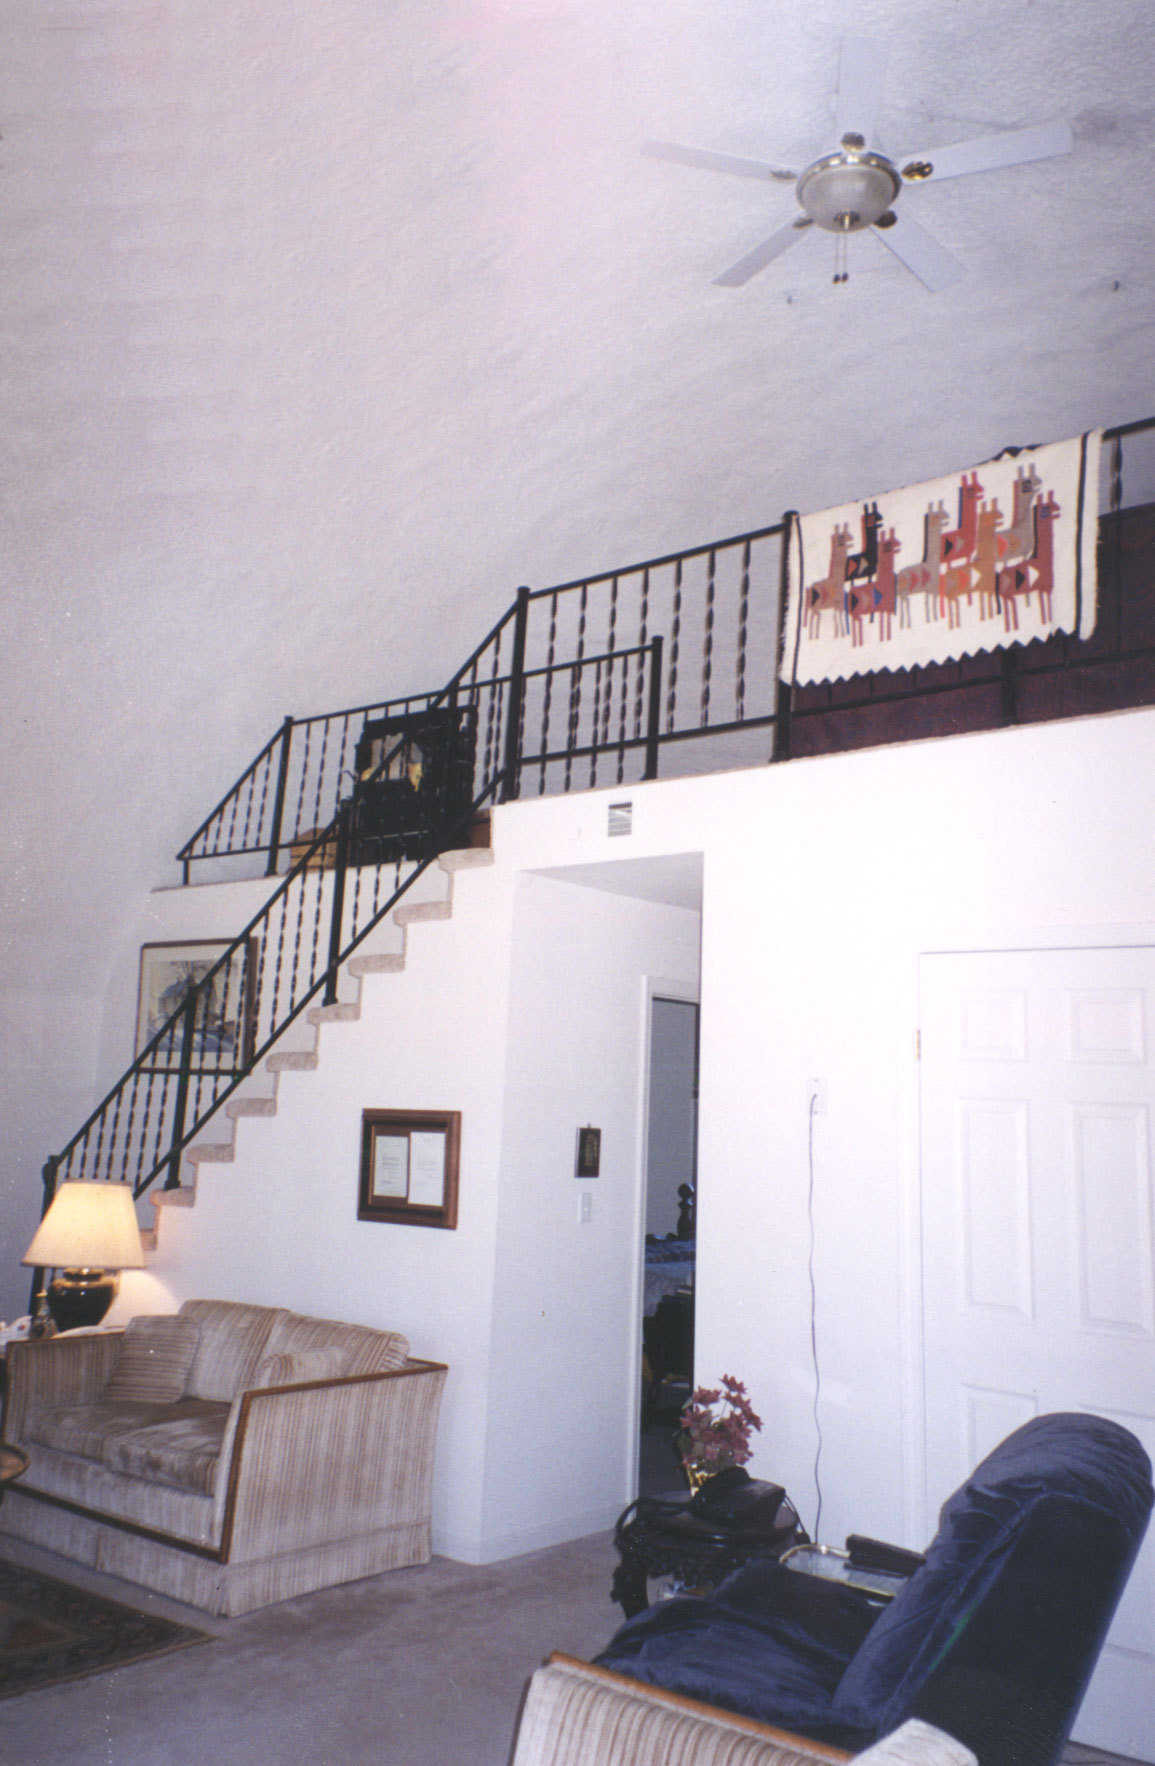 Staircase — The staircase leads to a loft that overlooks the main living area.